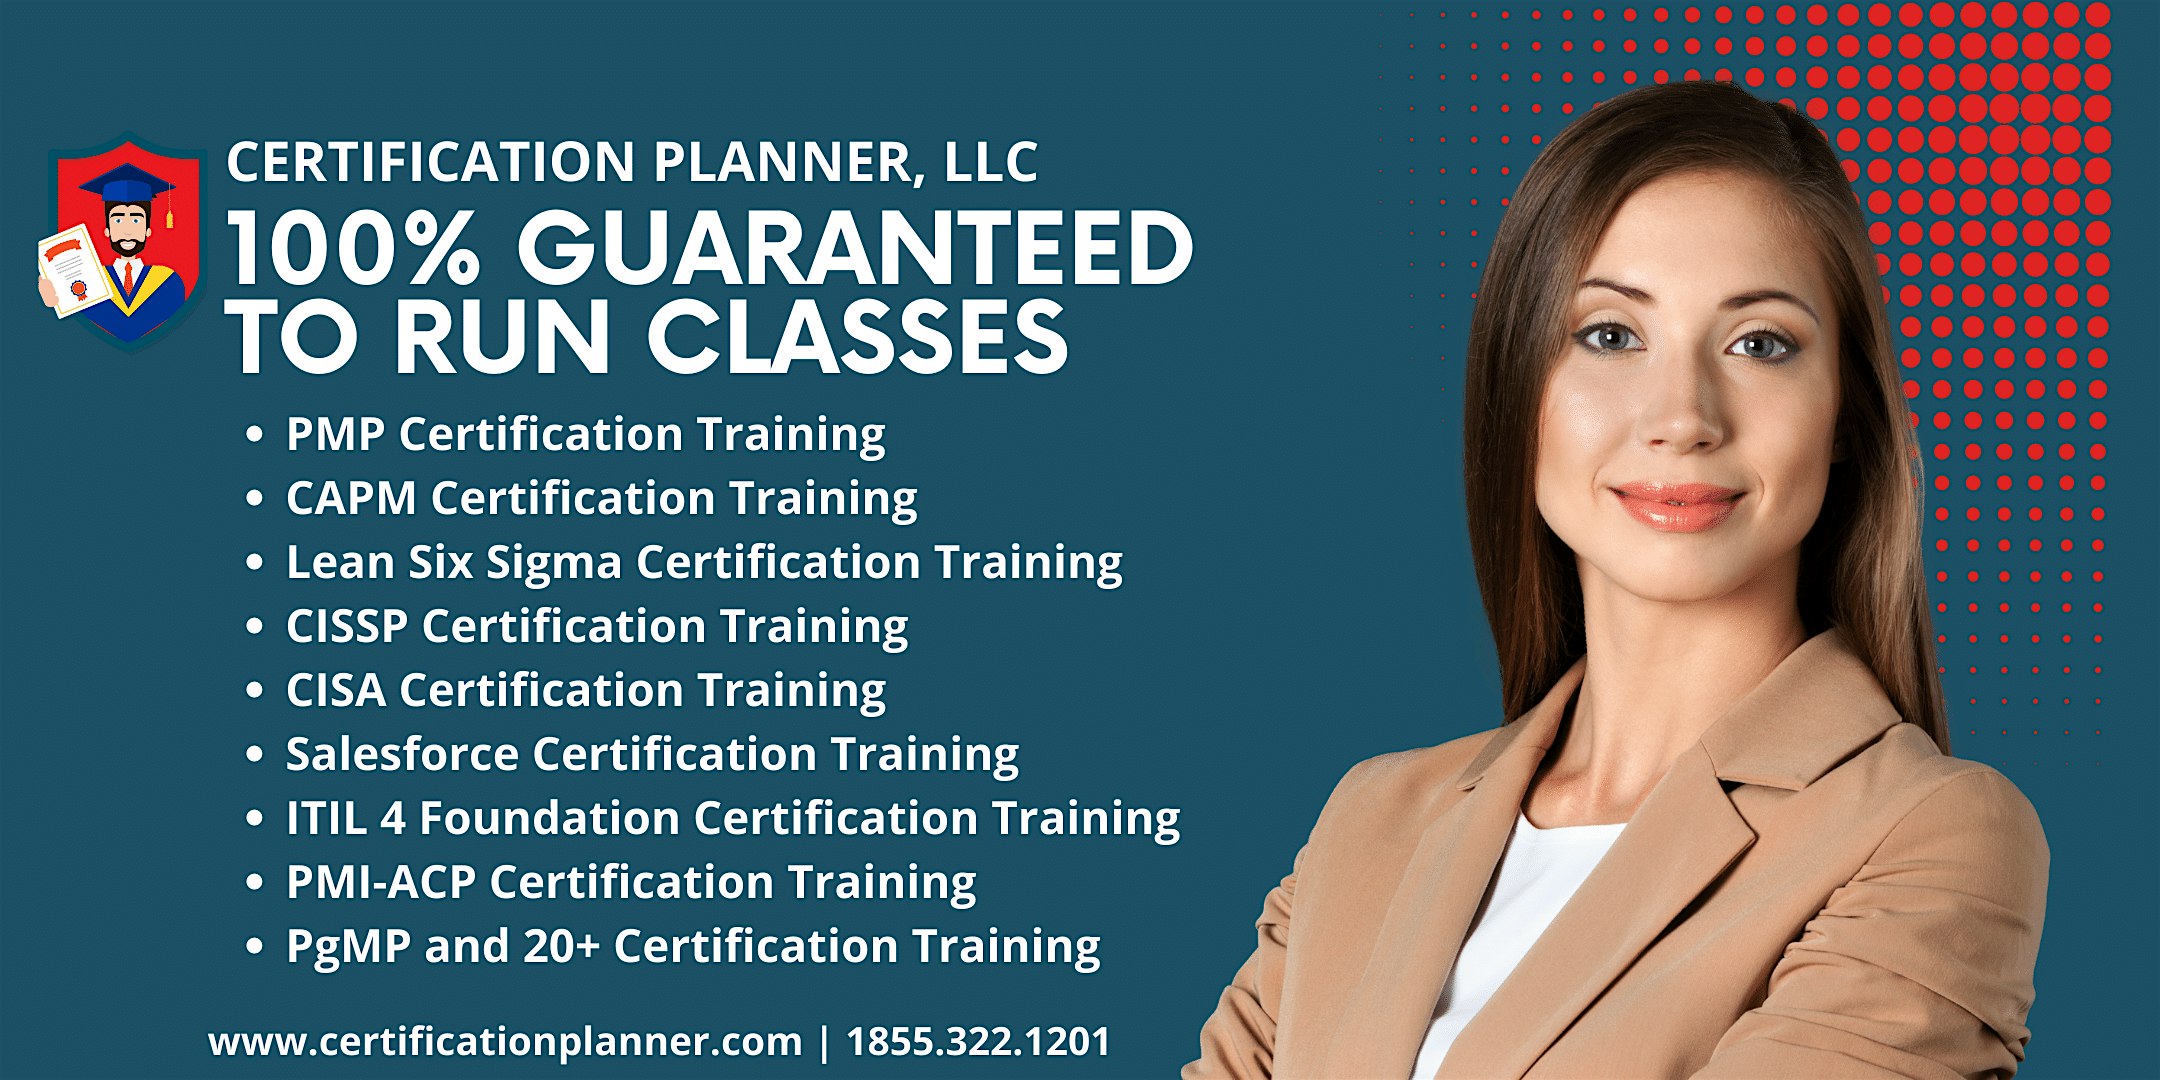 CISSP Online Training by Certification Planner in Colorado Springs